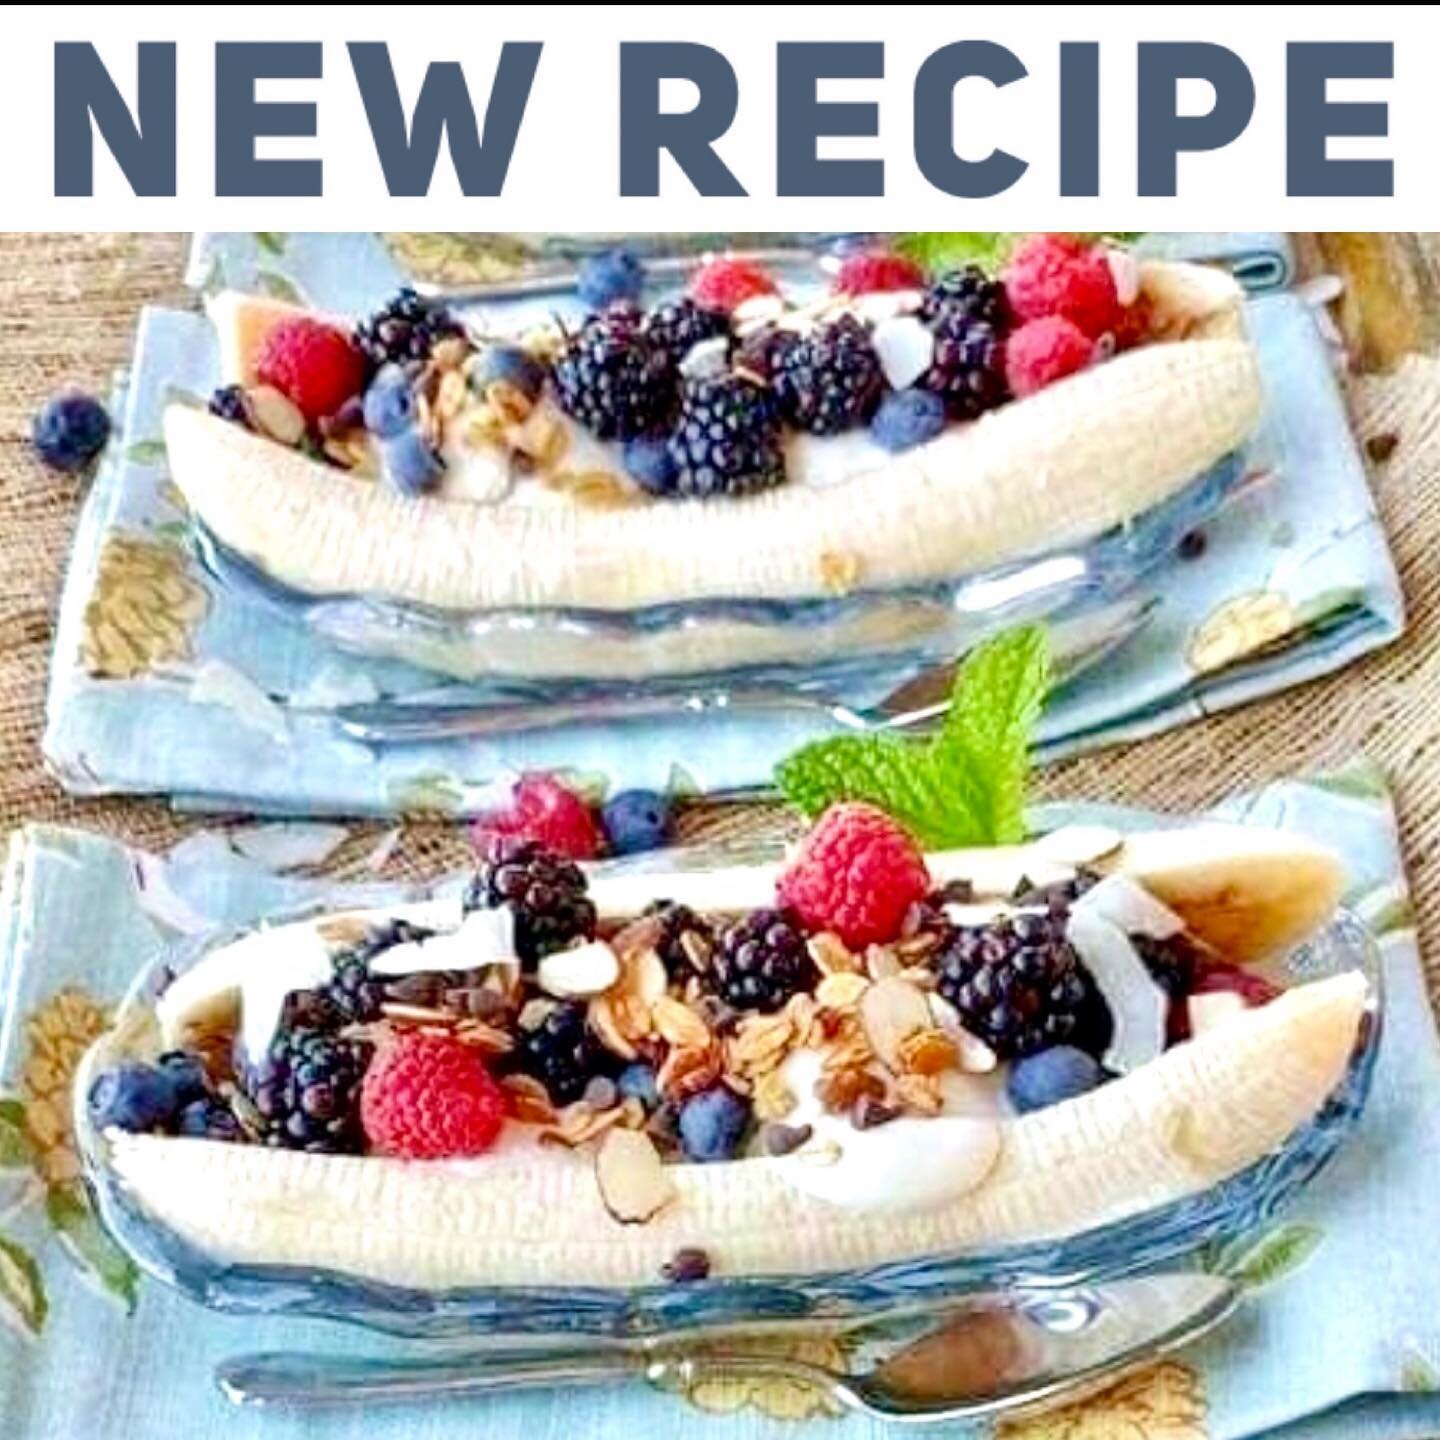 HEALTHY BREAKFAST BANANA SPLITS 🍌
Are you and your kids sick of your standard, everyday breakfasts?
.
How about you wow them with a banana split!
.
For Breakfast?
.
That&rsquo;s right!
.
But this isn&rsquo;t your ordinary banana split. It&rsquo;s th